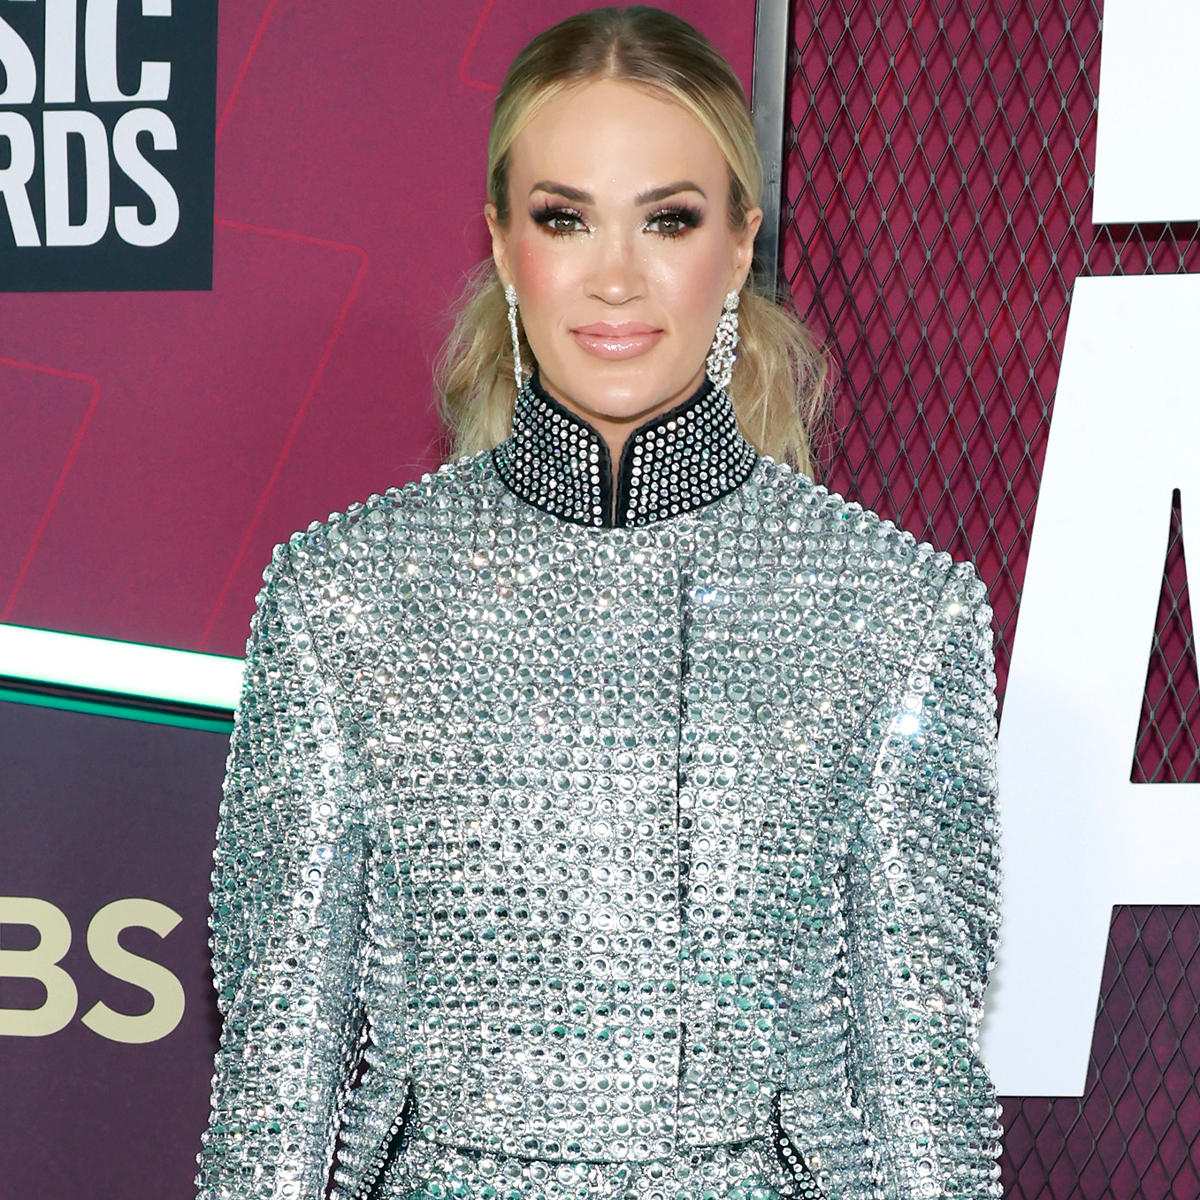 Carrie Underwood Is a Fashion Champion With 2023 CMT Music Awards Look